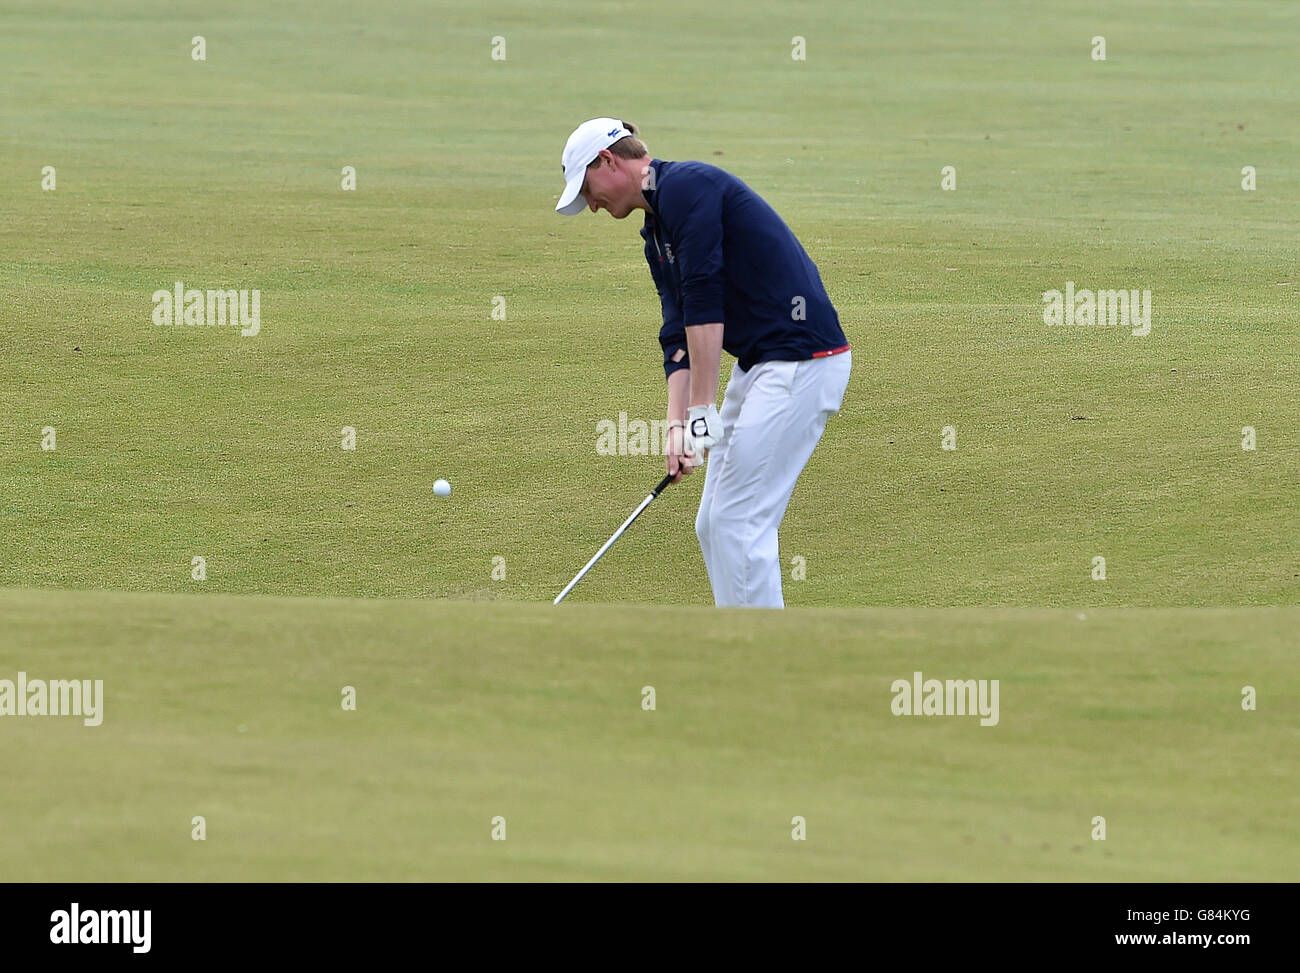 Golf - The Open Championship 2015 - Day Four - St Andrews. USA's Jordan Niebrugge on the 18th during day four of The Open Championship 2015 at St Andrews, Fife. Stock Photo